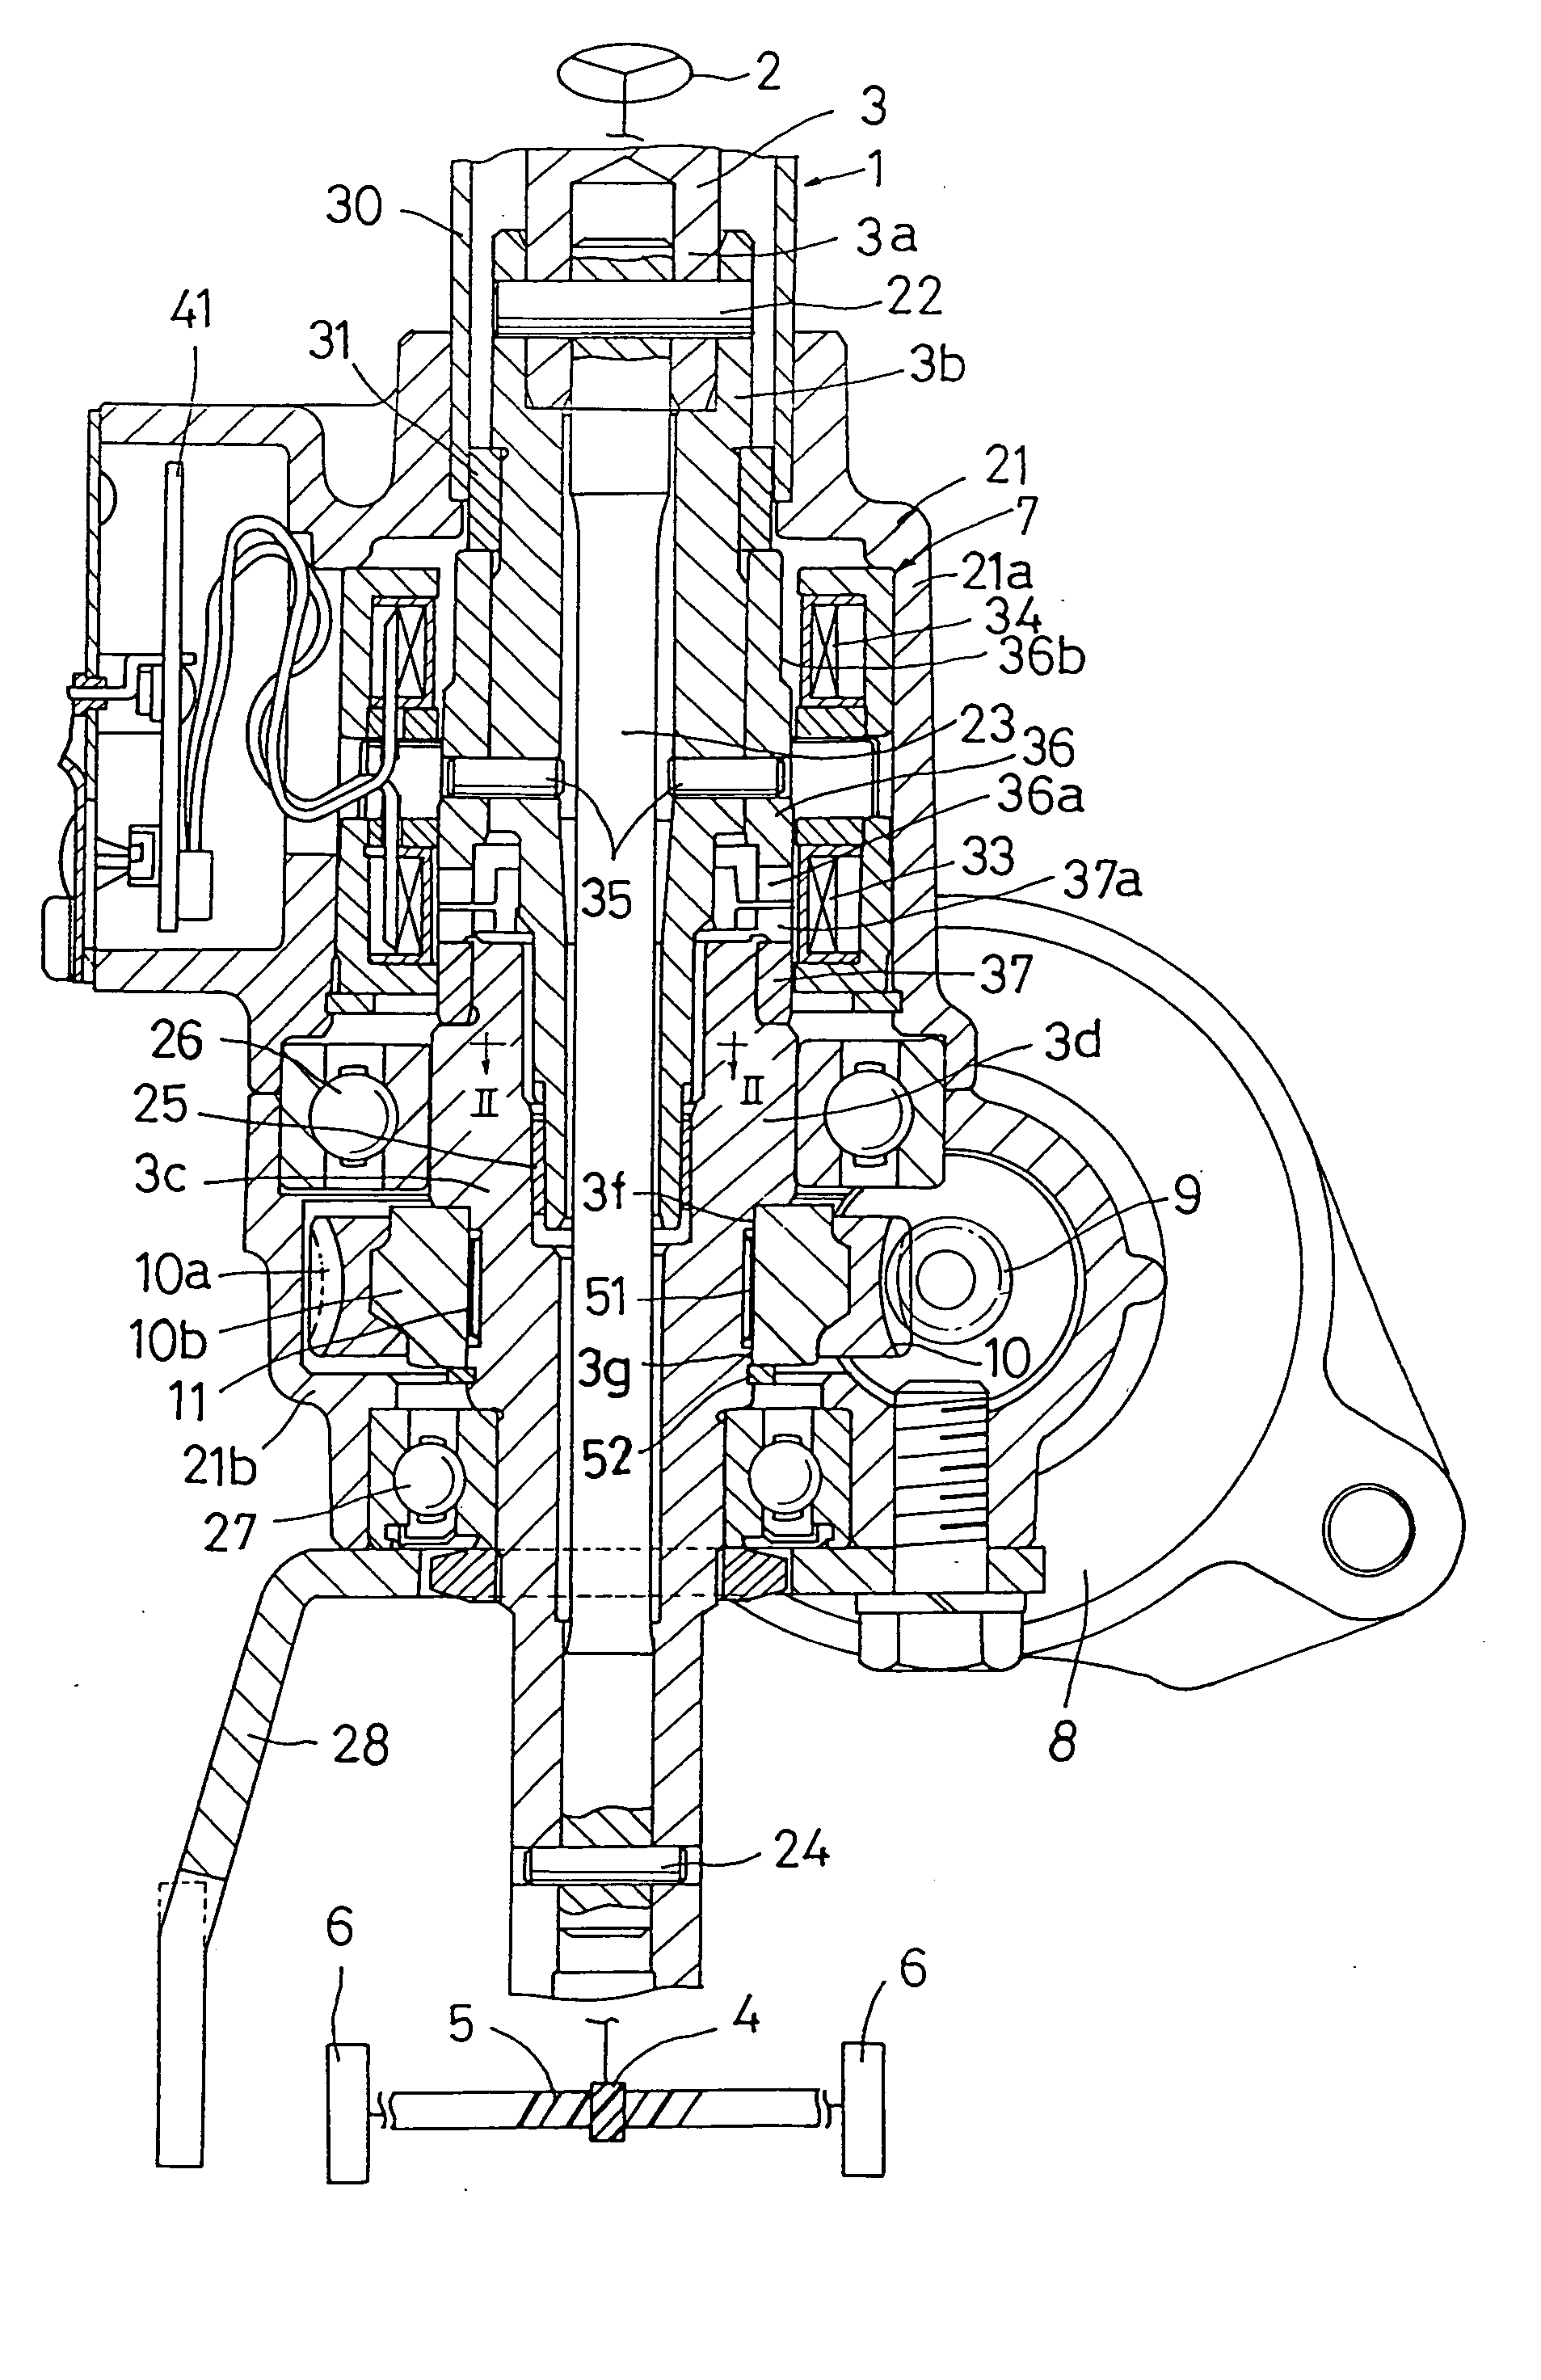 Motor operated power steering device